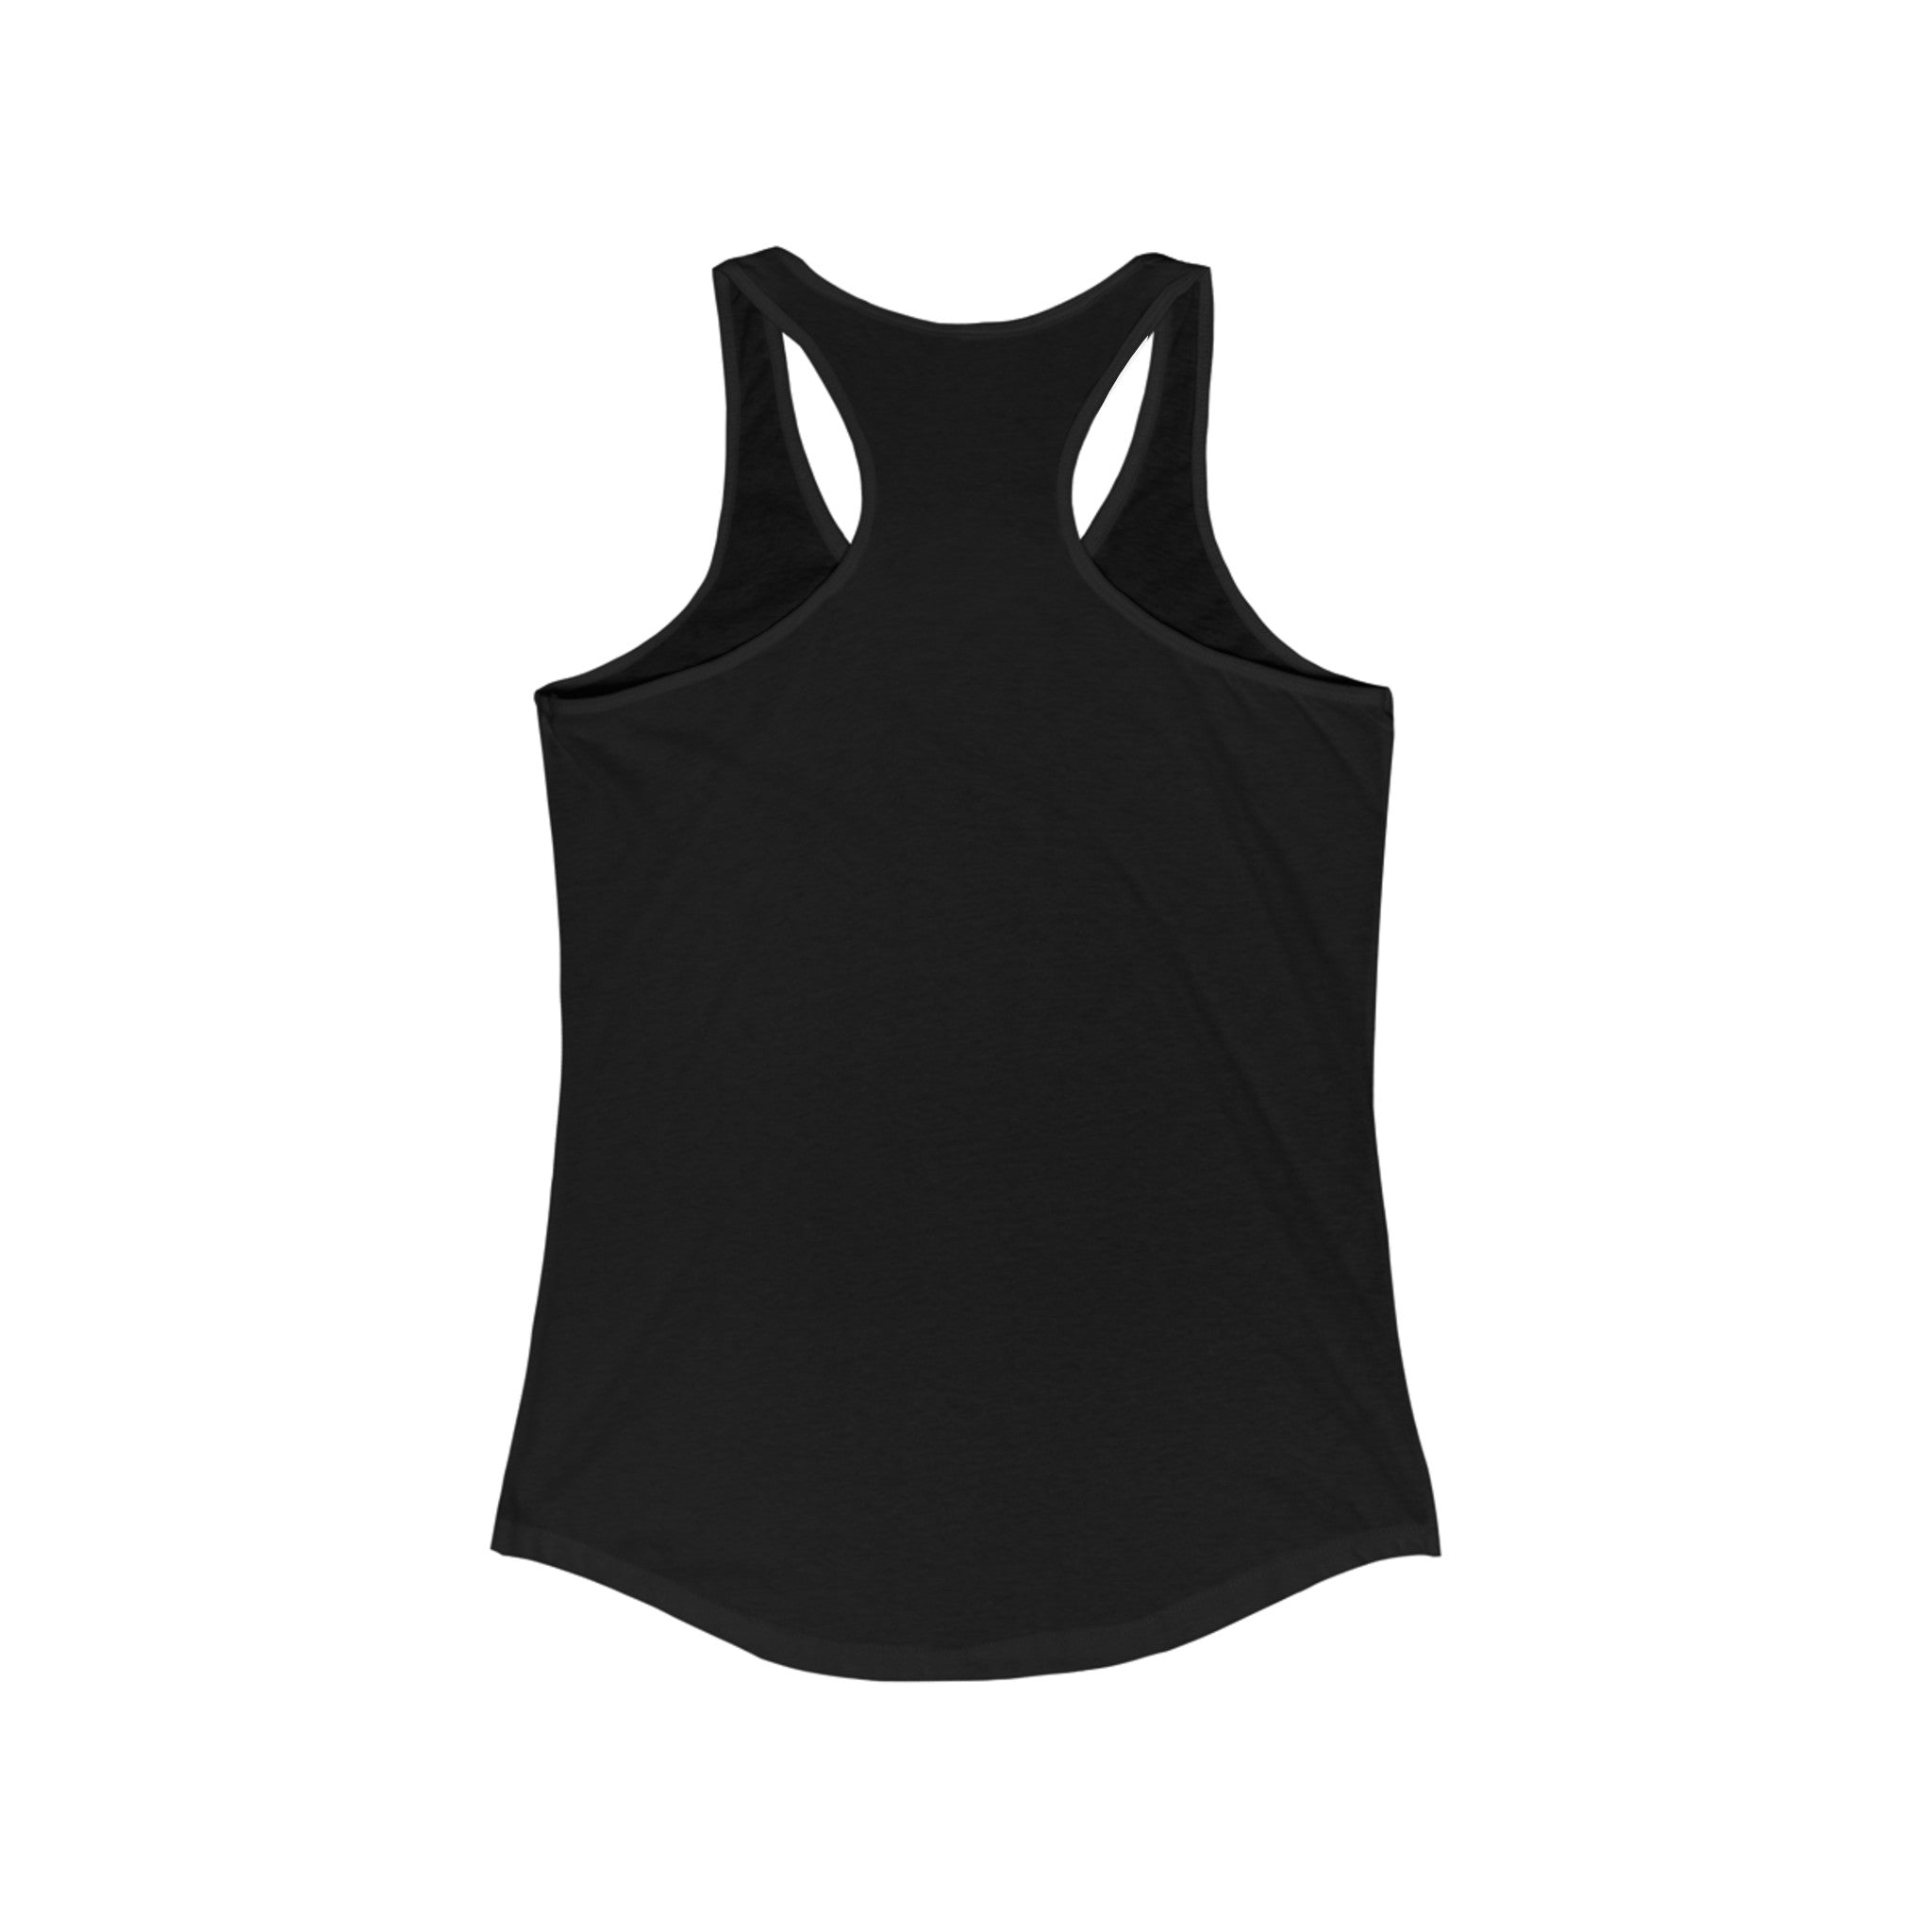 A trendy lightweight Father Graphic - Women's Racerback Tank shown from the back against a white background, perfect for an active style.